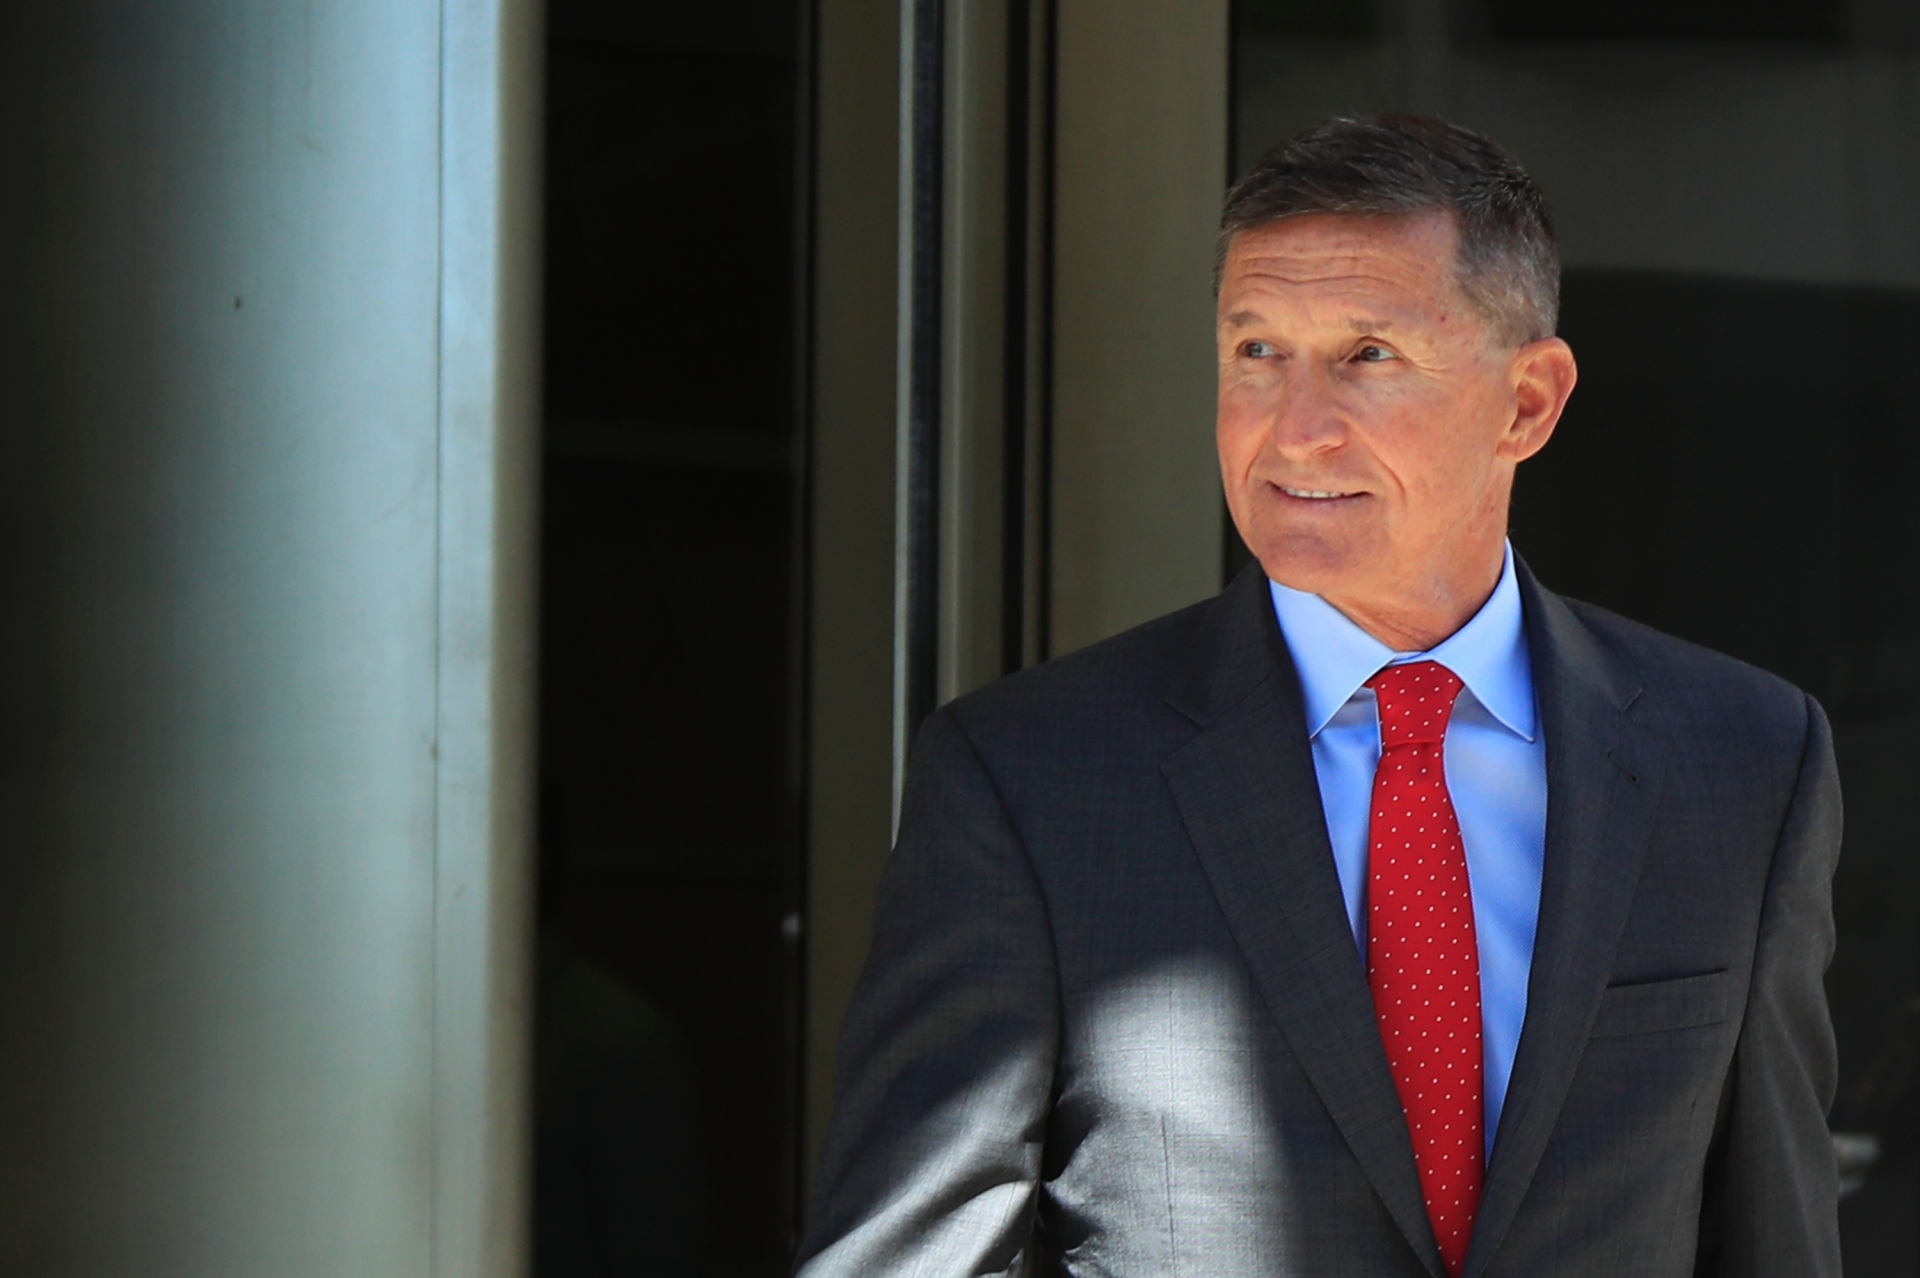 UK memo warned about dossier author’s 'credibility,' Flynn team alleges in explosive filing